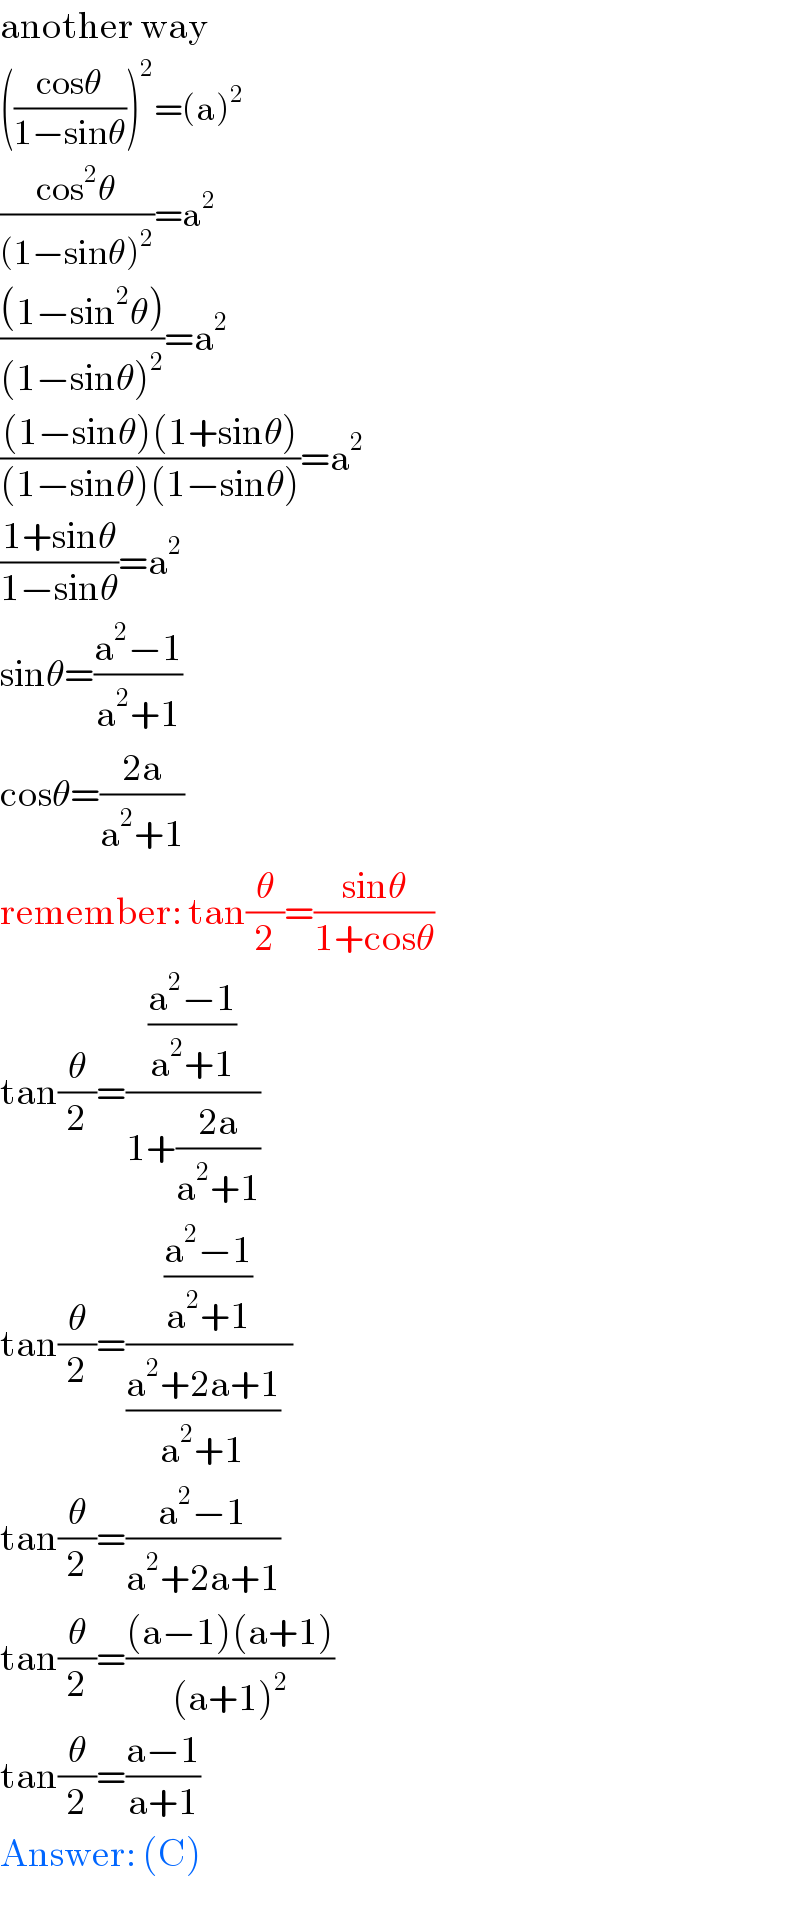 another way  (((cosθ)/(1−sinθ)))^2 =(a)^2   ((cos^2 θ)/((1−sinθ)^2 ))=a^2   (((1−sin^2 θ))/((1−sinθ)^2 ))=a^2   (((1−sinθ)(1+sinθ))/((1−sinθ)(1−sinθ)))=a^2   ((1+sinθ)/(1−sinθ))=a^2   sinθ=((a^2 −1)/(a^2 +1))  cosθ=((2a)/(a^2 +1))  remember: tan(θ/2)=((sinθ)/(1+cosθ))  tan(θ/2)=(((a^2 −1)/(a^2 +1))/(1+((2a)/(a^2 +1))))  tan(θ/2)=(((a^2 −1)/(a^2 +1))/(((a^2 +2a+1)/(a^2 +1))  ))  tan(θ/2)=((a^2 −1)/(a^2 +2a+1))  tan(θ/2)=(((a−1)(a+1))/((a+1)^2 ))  tan(θ/2)=((a−1)/(a+1))  Answer: (C)  